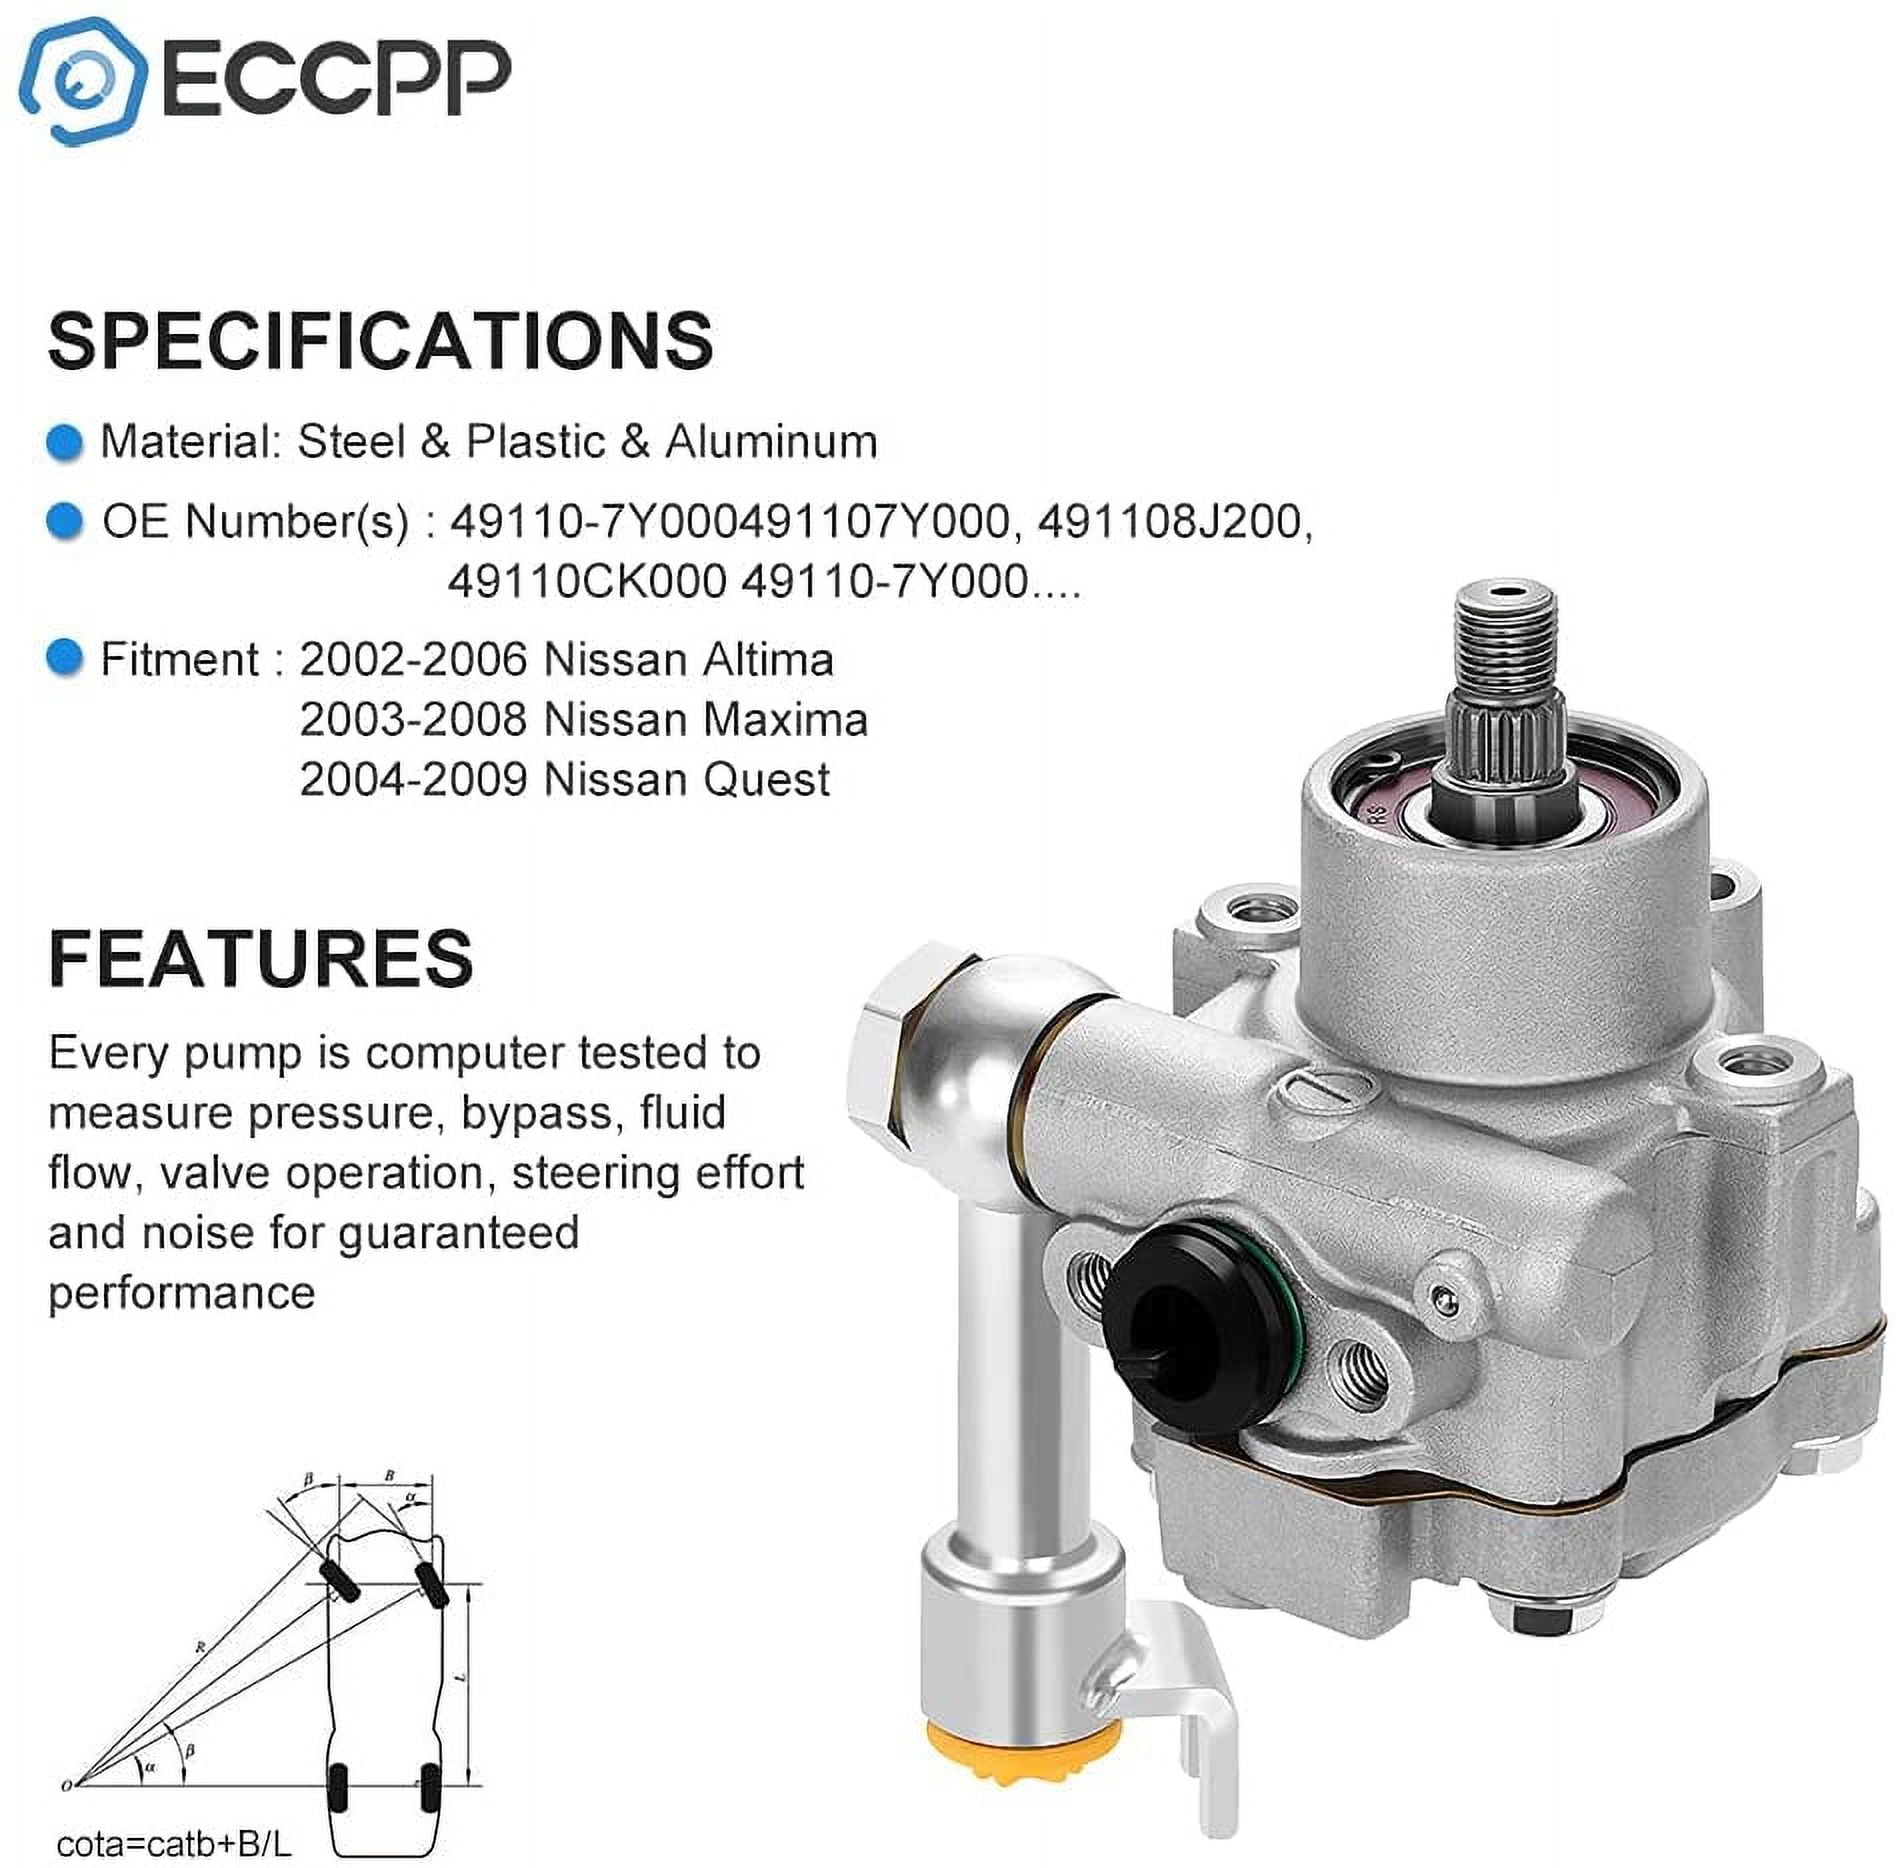 ECCPP Power Steering Pump Fit for 2003-2008 for Nissan Maxima